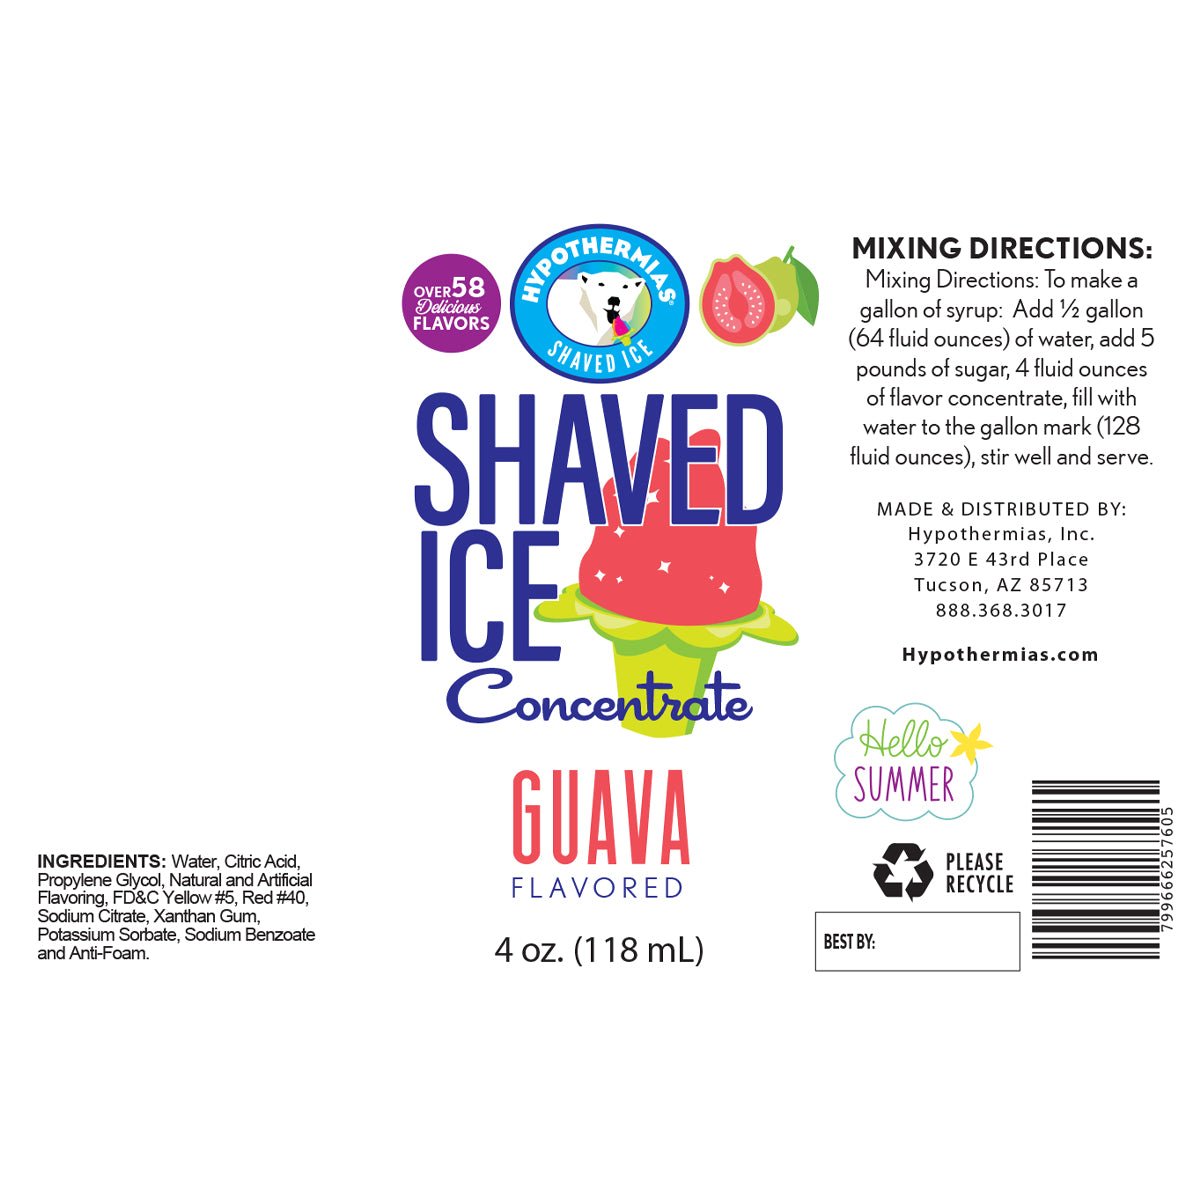 Hypothermias guava shaved ice or snow cone flavor syrup concentrate ingredient label.